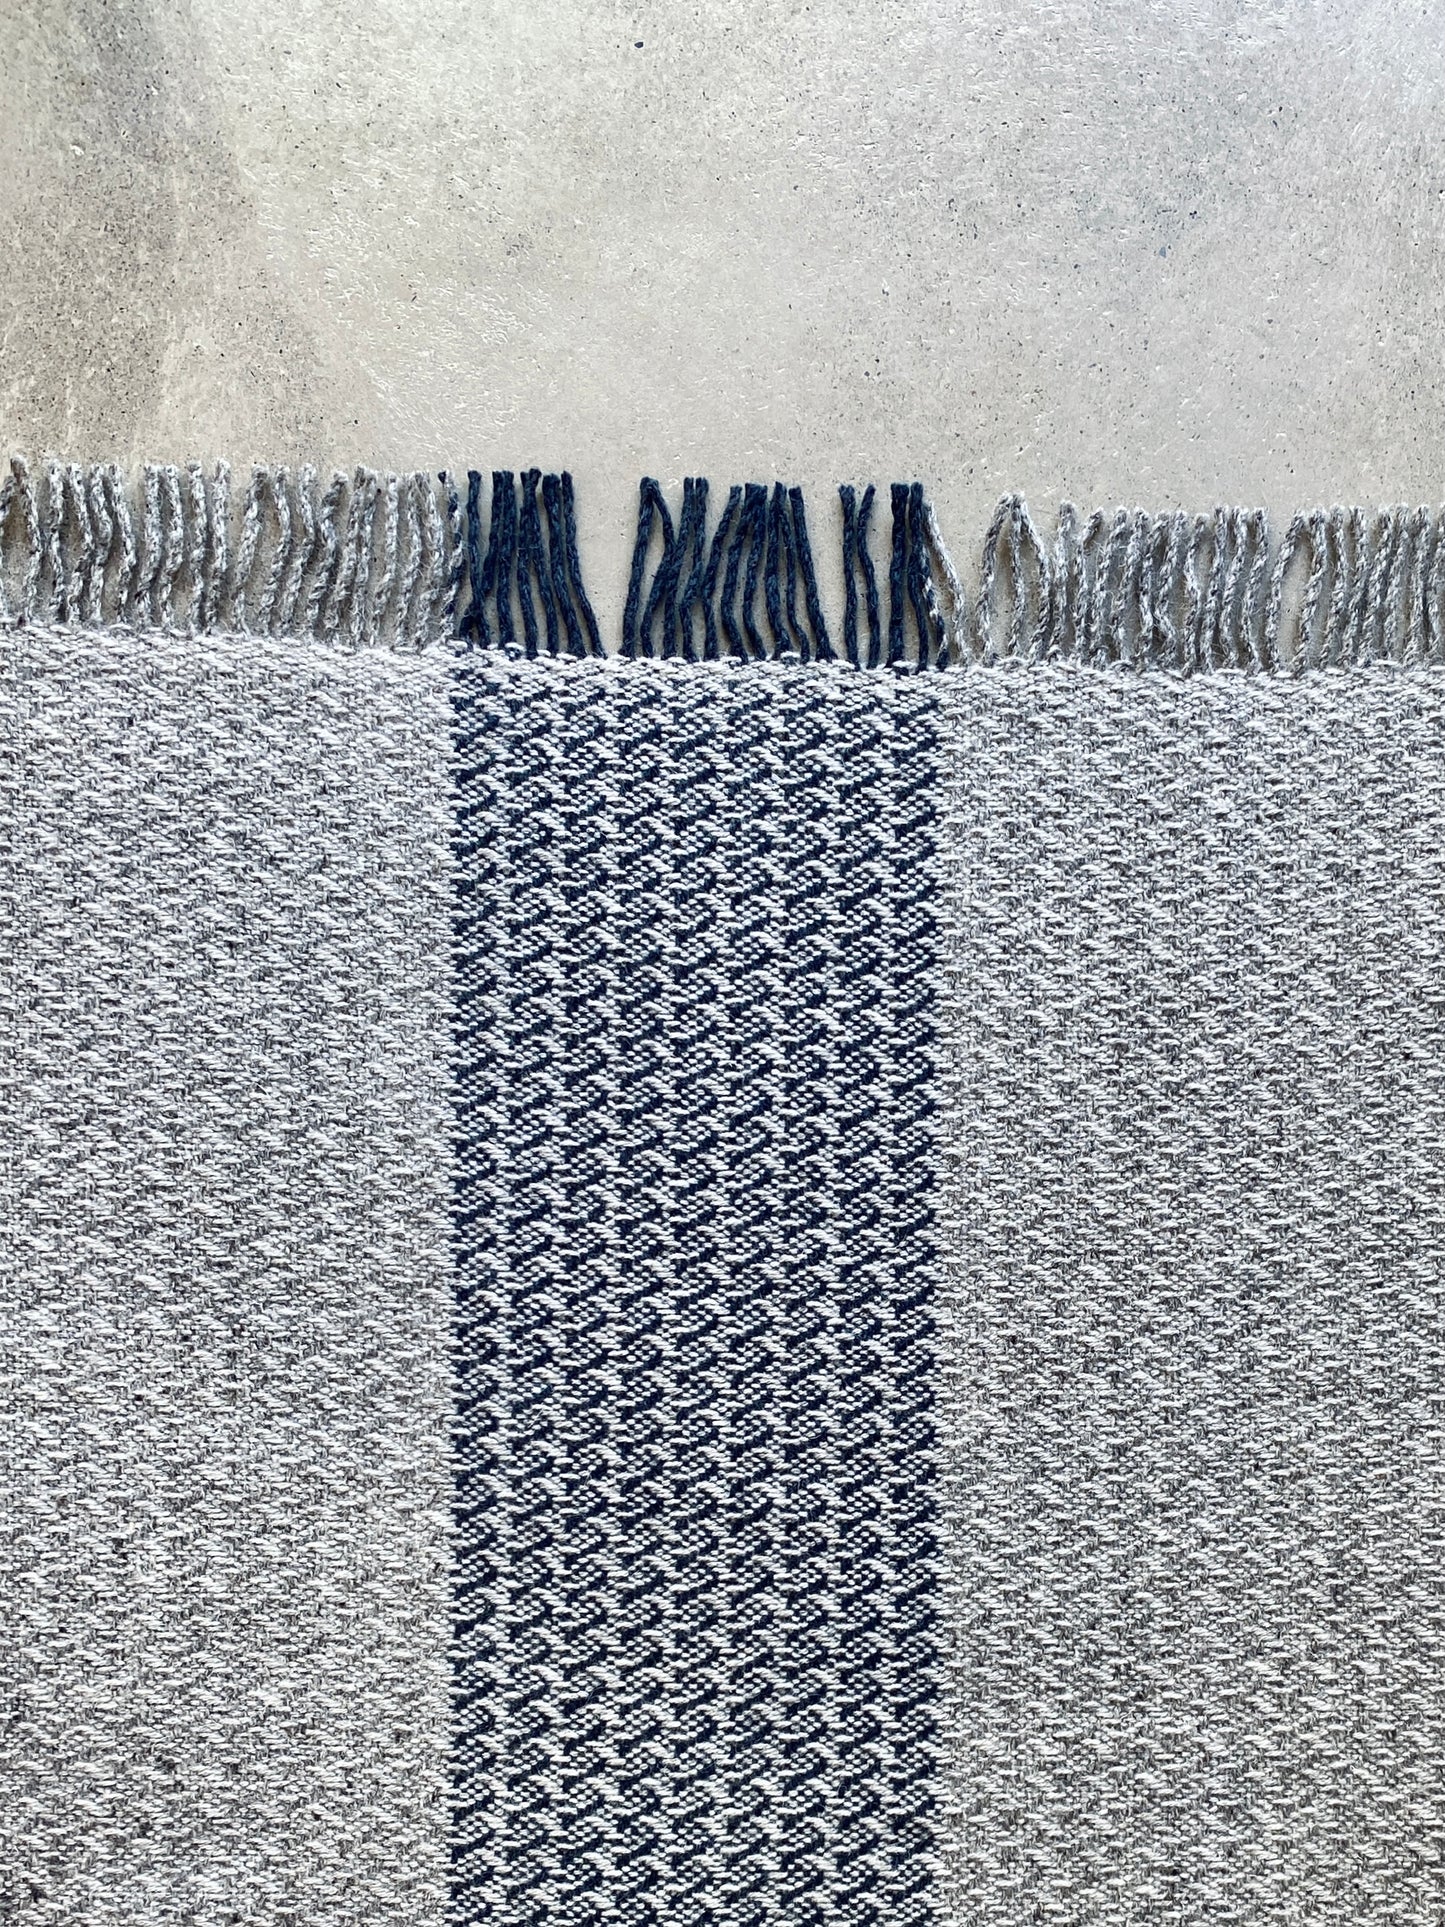 The Reassuring Blanket III - Iona Wool, Limited Anniversary Edition